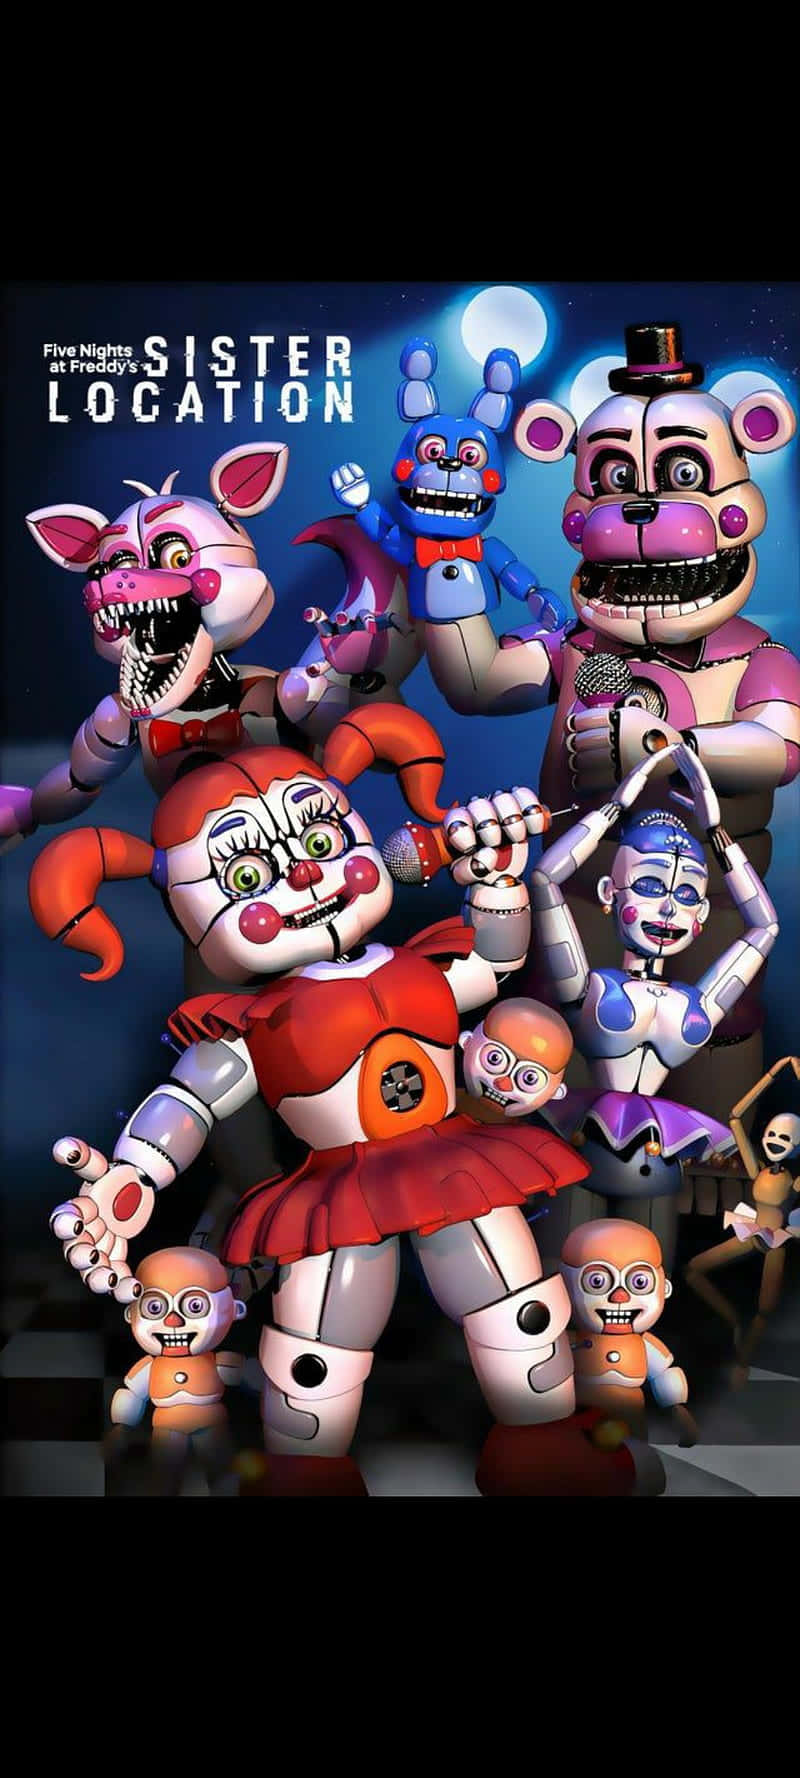 Five Nights At Freddy's: Sister Location For Phone Wallpaper